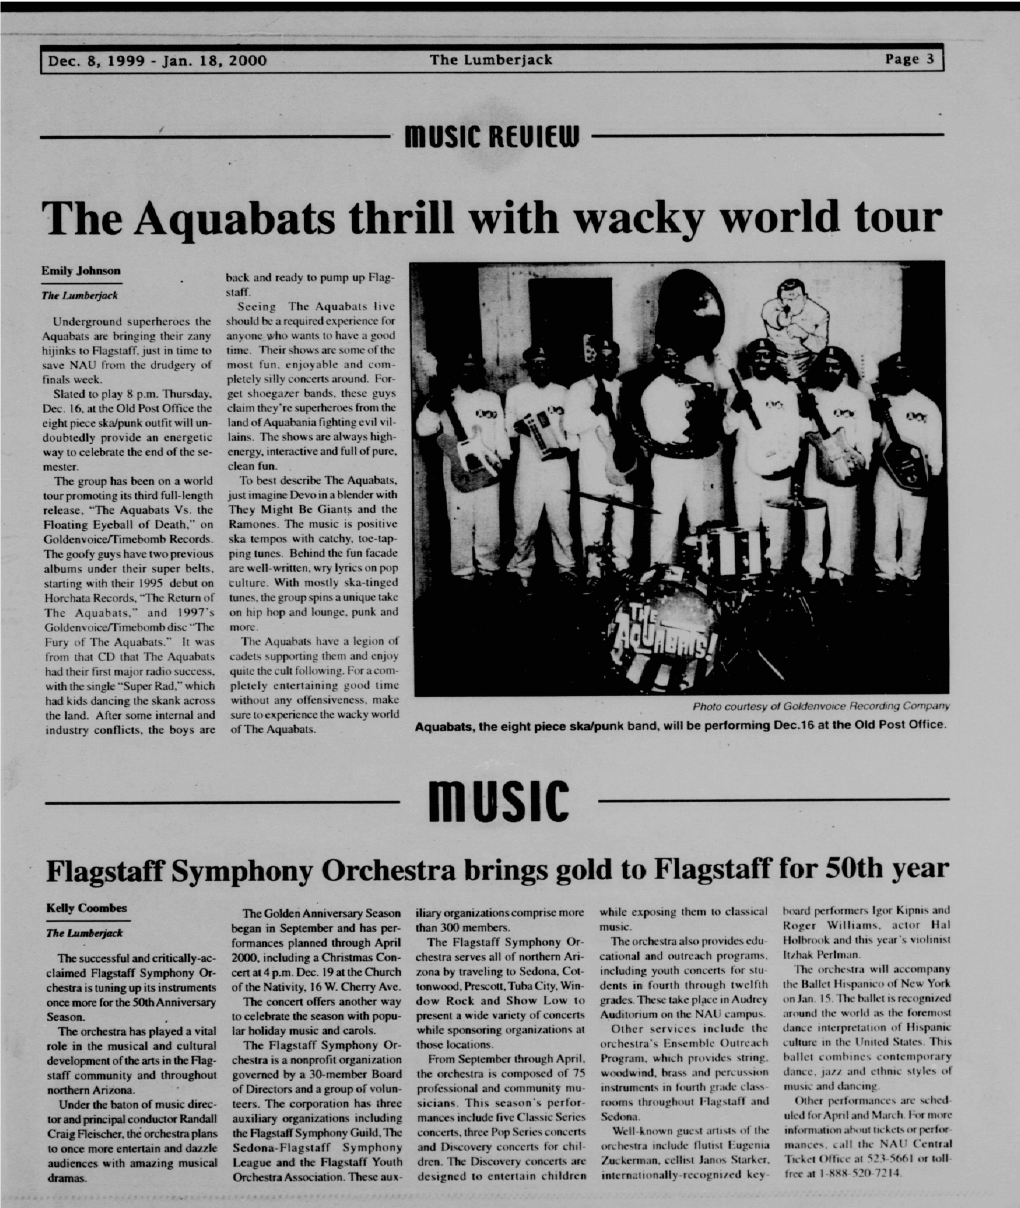 Flagstaff Symphony Orchestra Brings Gold to Flagstaff for 50Th Year